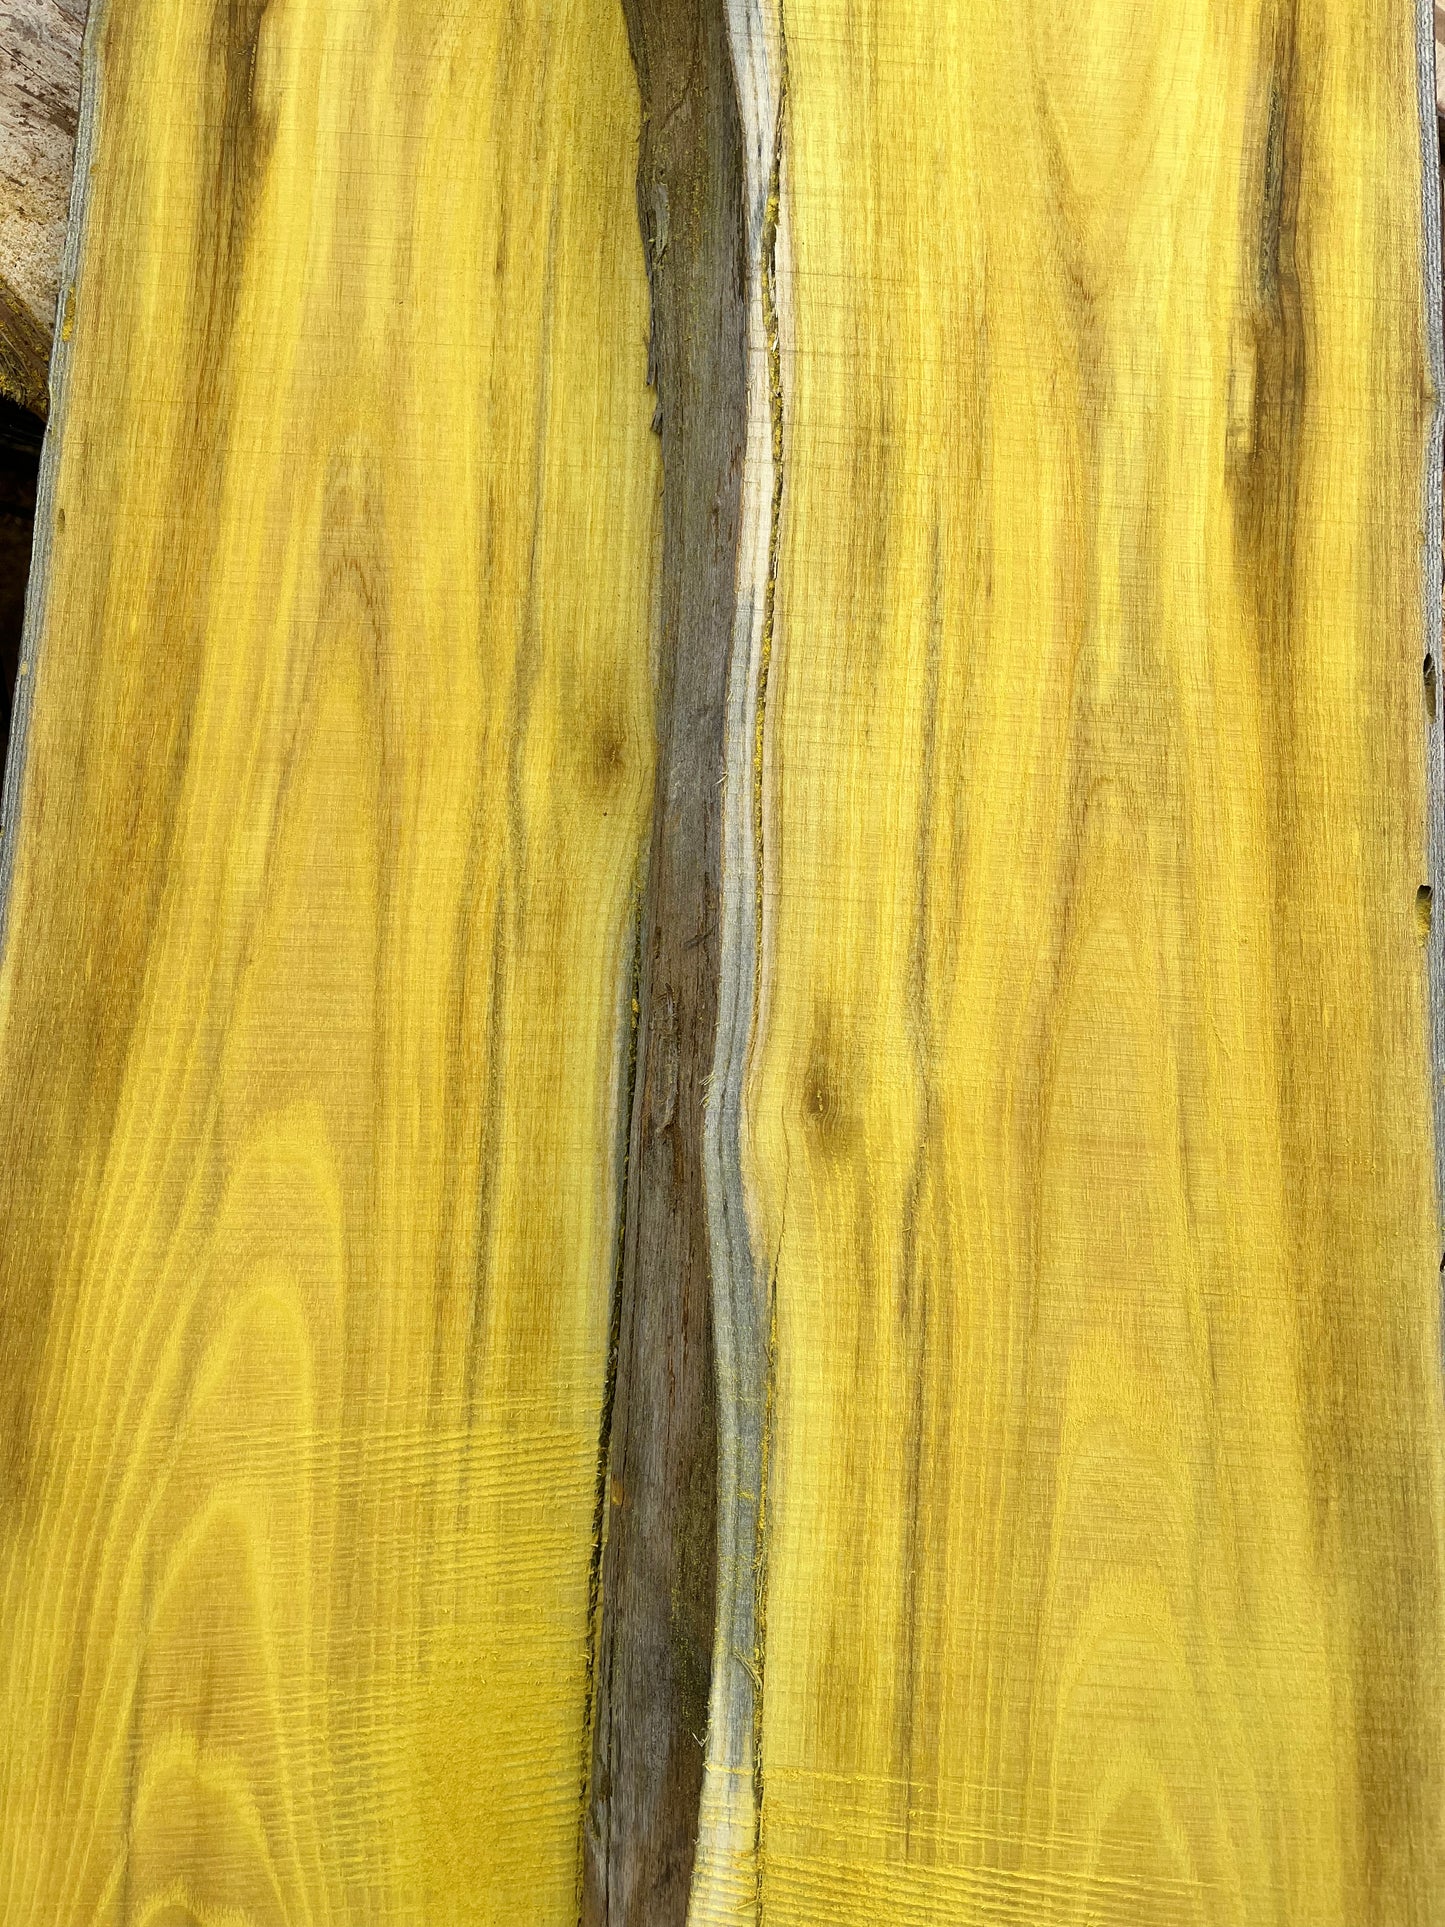 2" Thick Rough Cut Osage Orange (Bois d'Arc) Live Edge Slabs for Charcuterie Boards, Furniture, Table and Bar Tops, Shelves, and More - Kiln Dried